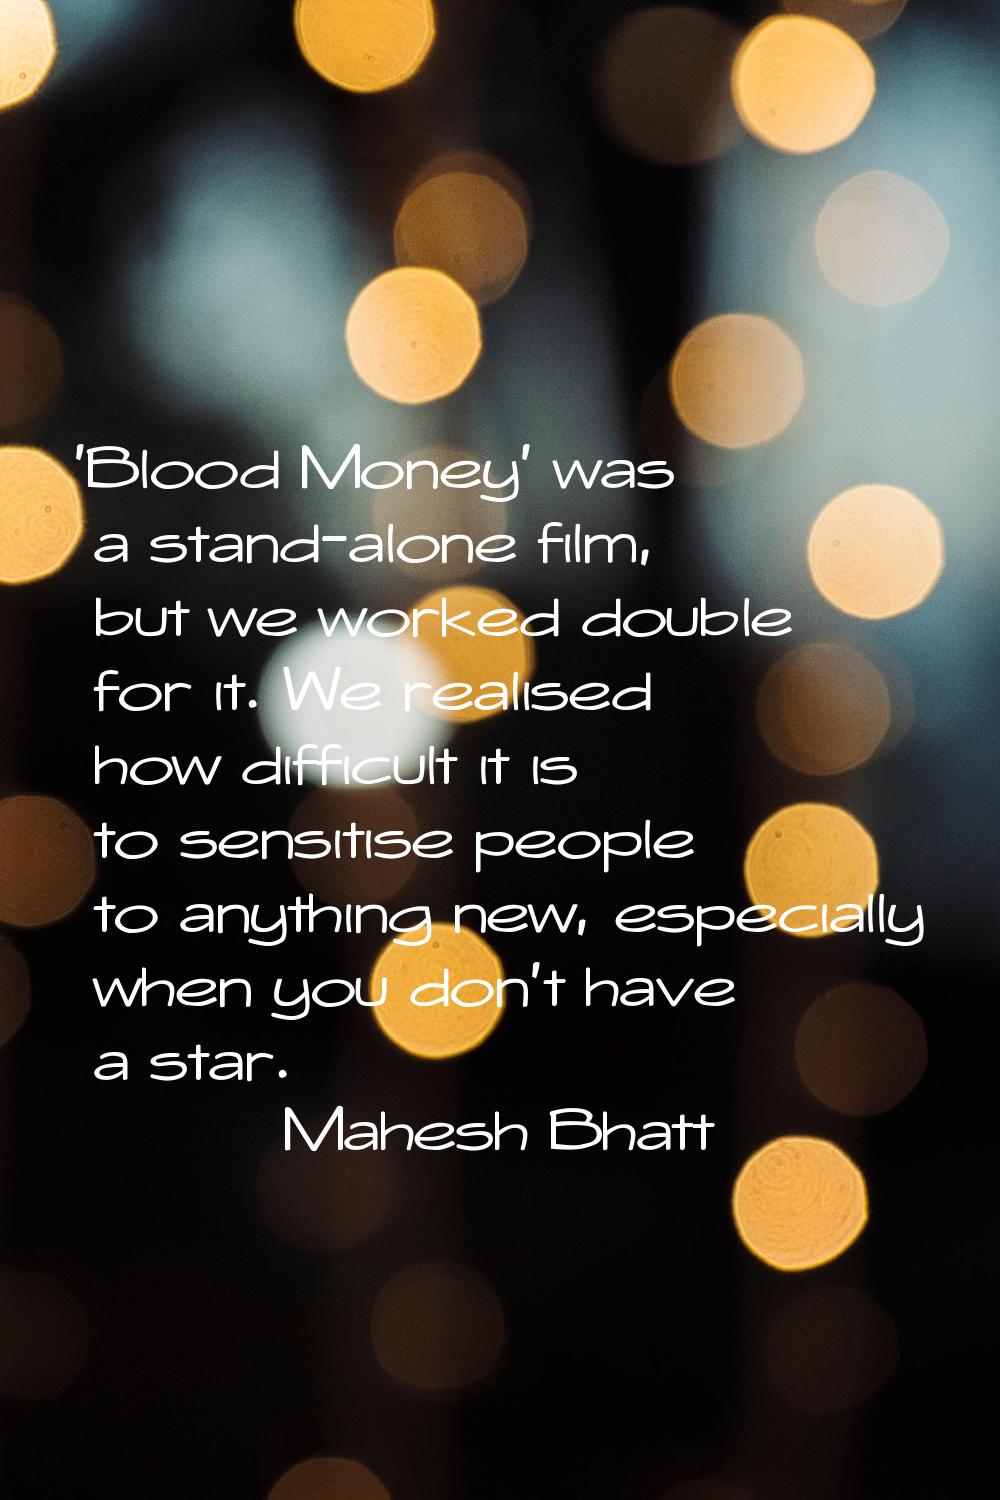 'Blood Money' was a stand-alone film, but we worked double for it. We realised how difficult it is 